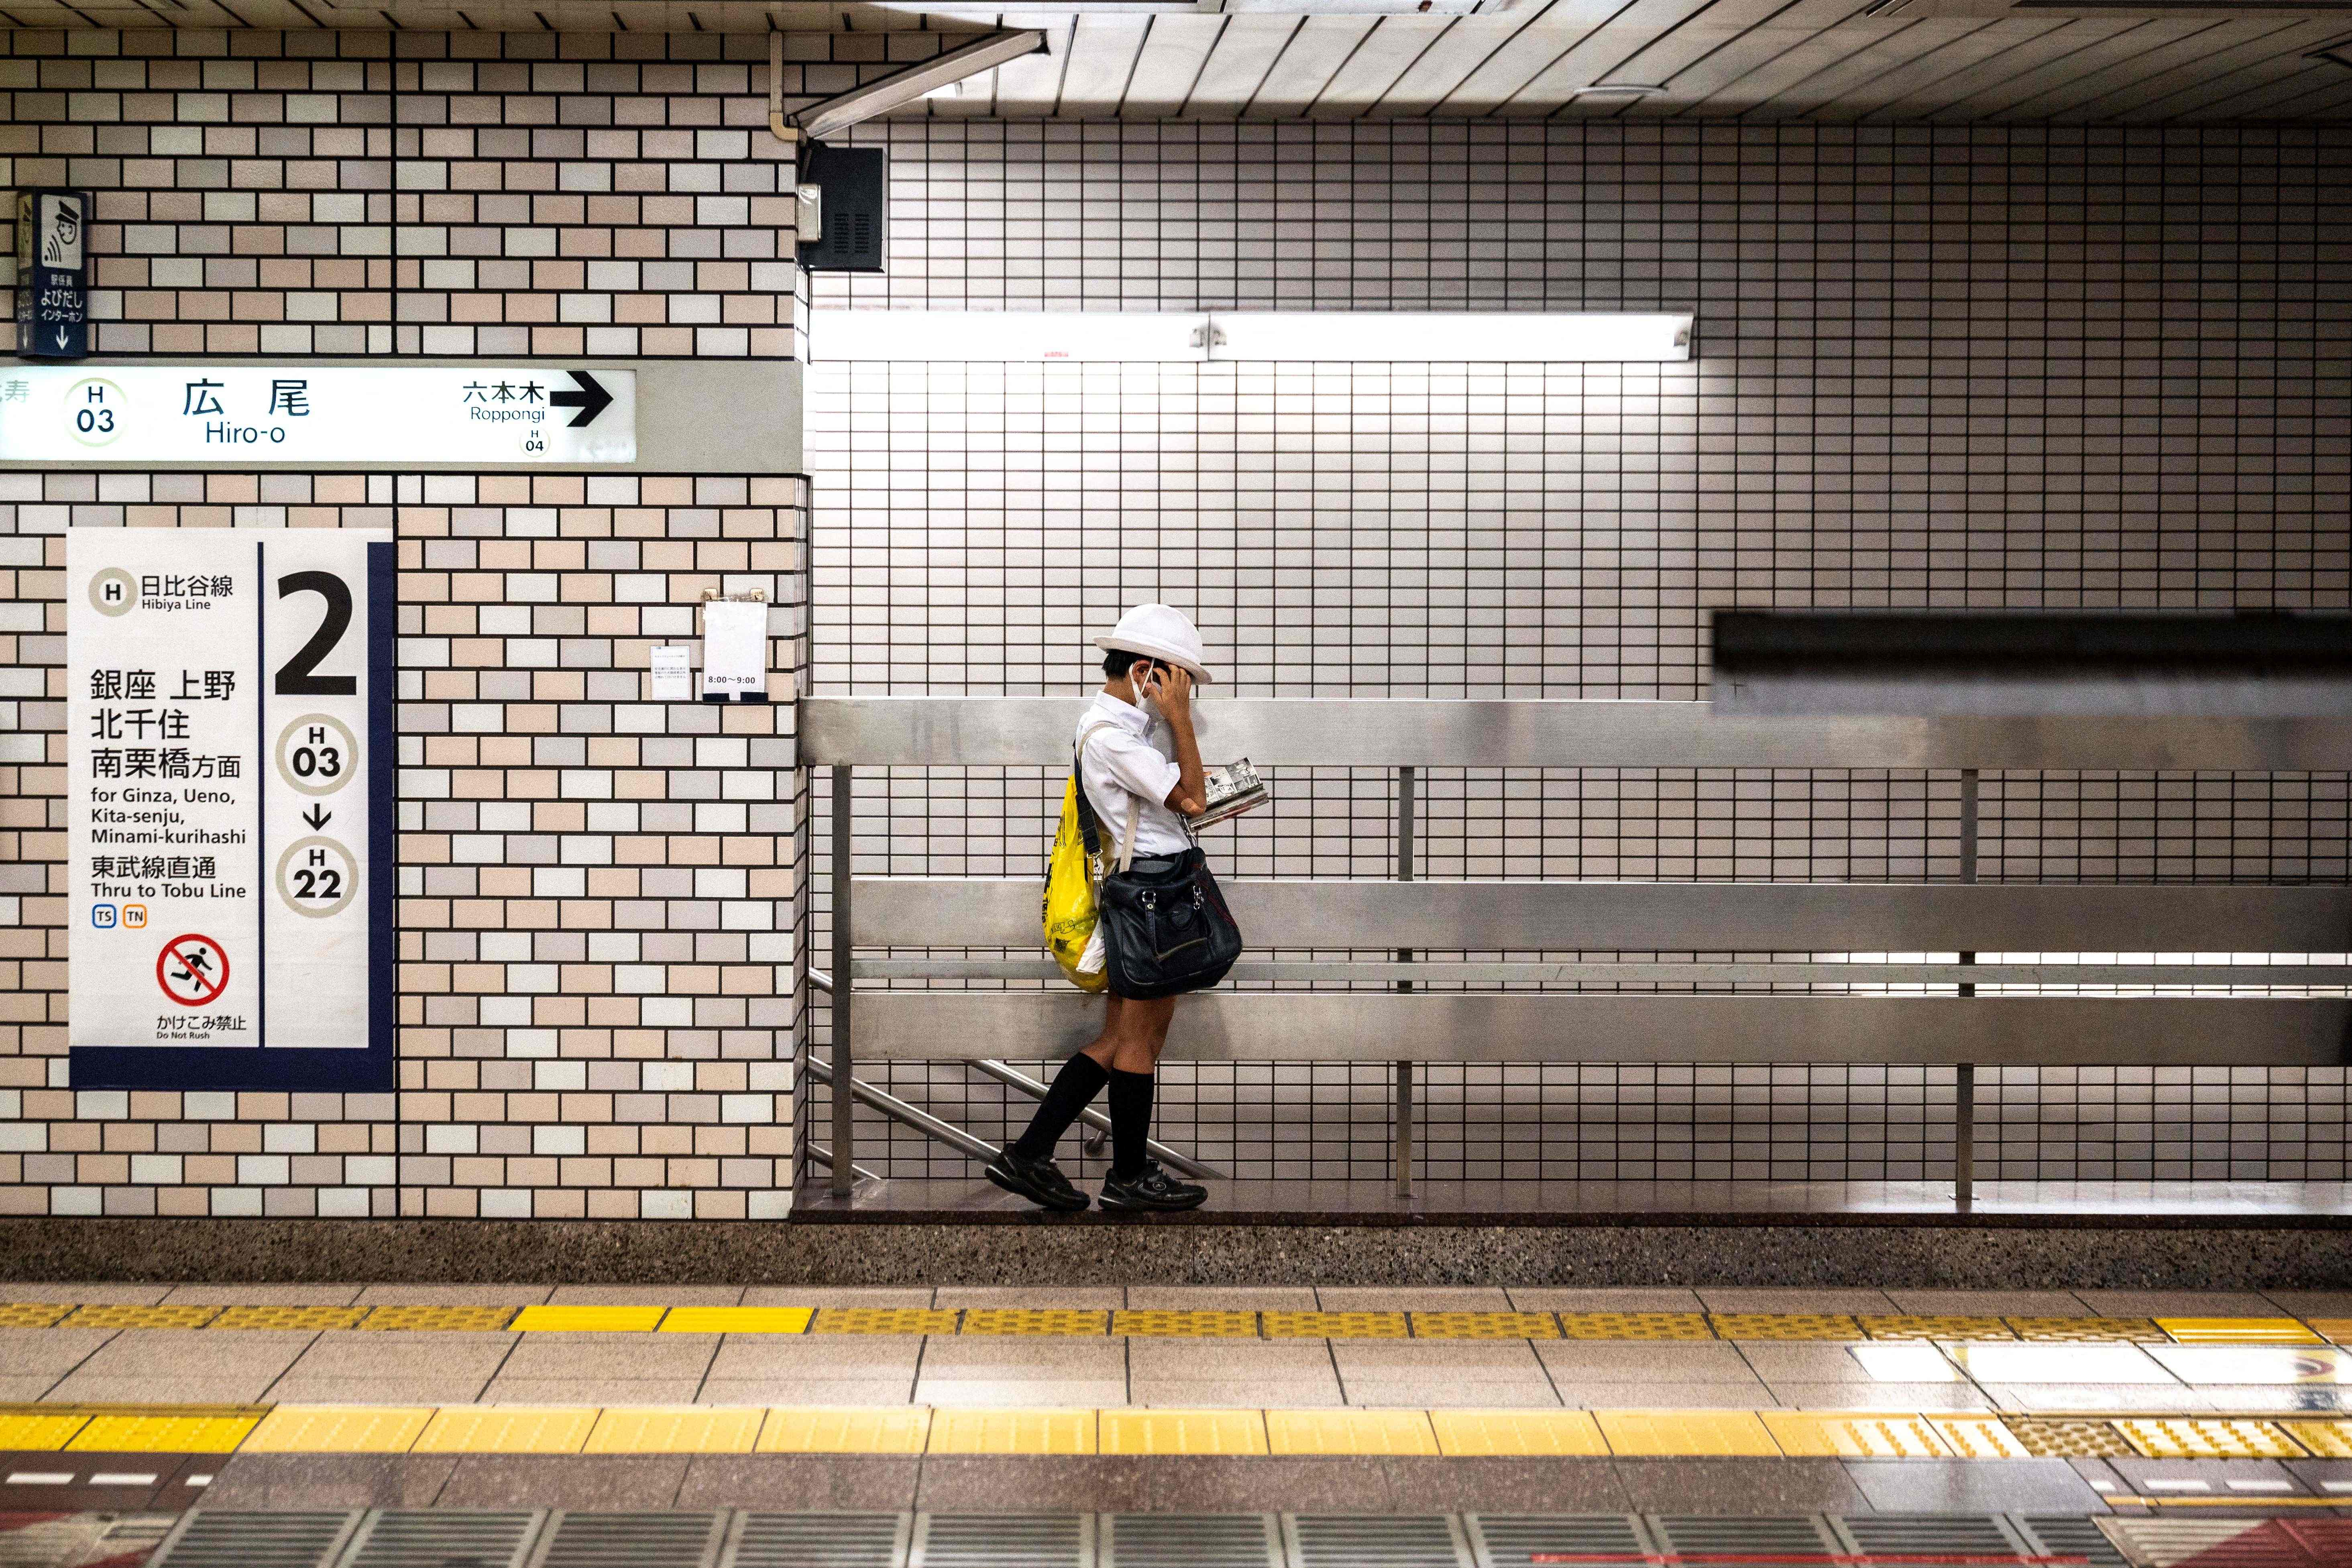 A schoolboy reads a manga comic book while waiting for the train on a platform in Tokyo